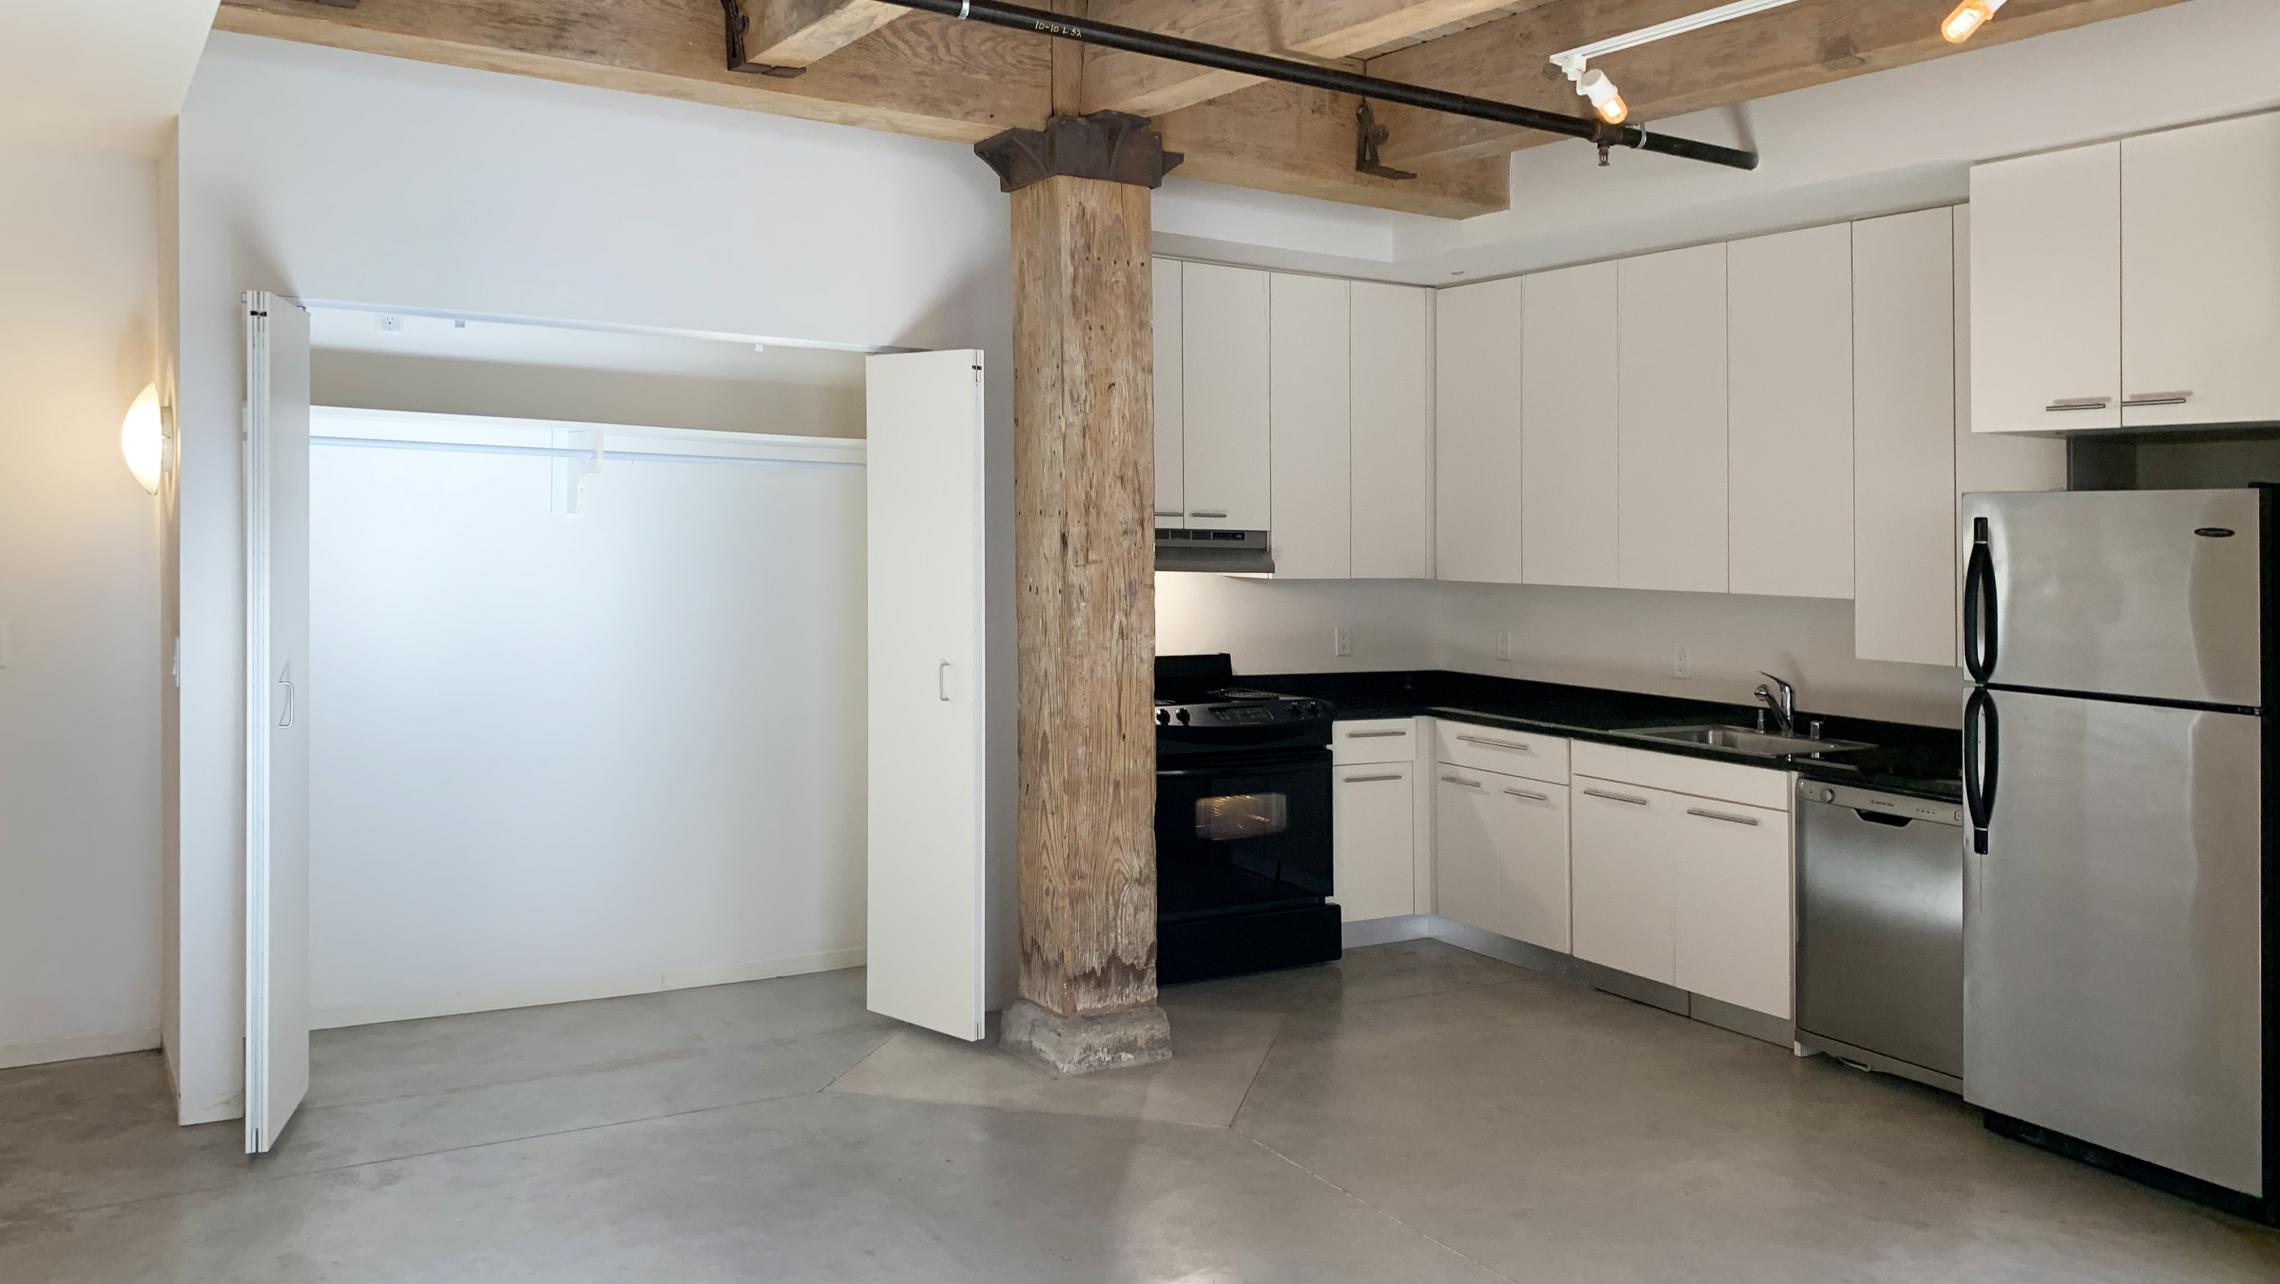 Tobacco-Lofts-at-The-Yards-Apartment-E106-One-Bedroom-Historic-Design-Exposed-Brick-Concrete-Floors-Downtown-Madison-Fitness-Lounge-Courtyard-Views-Cat-Upscale-Modern-Home